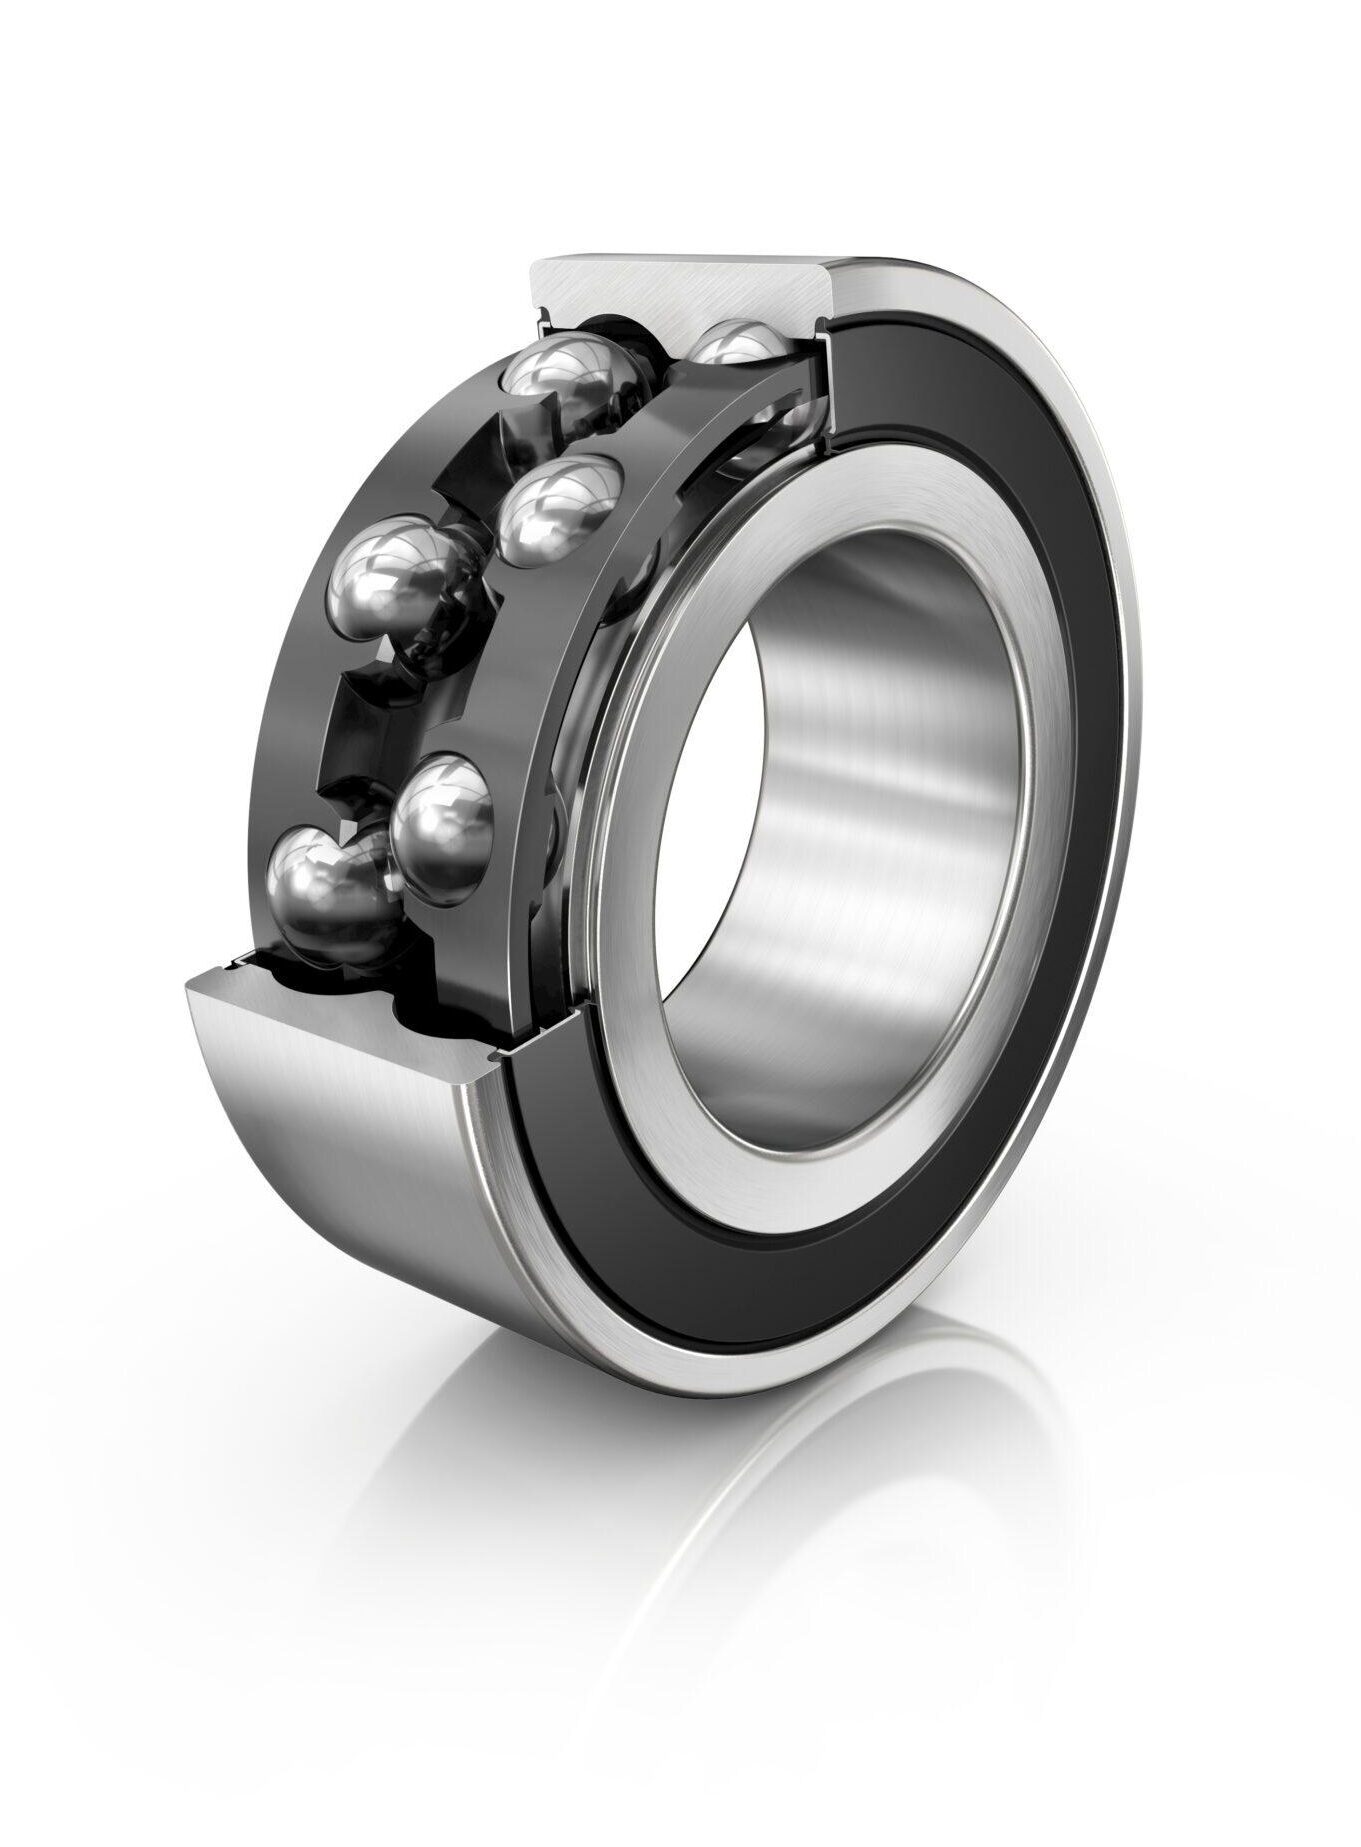 Angular ball bearing with double row and plastic cage. Partial cross section shown.